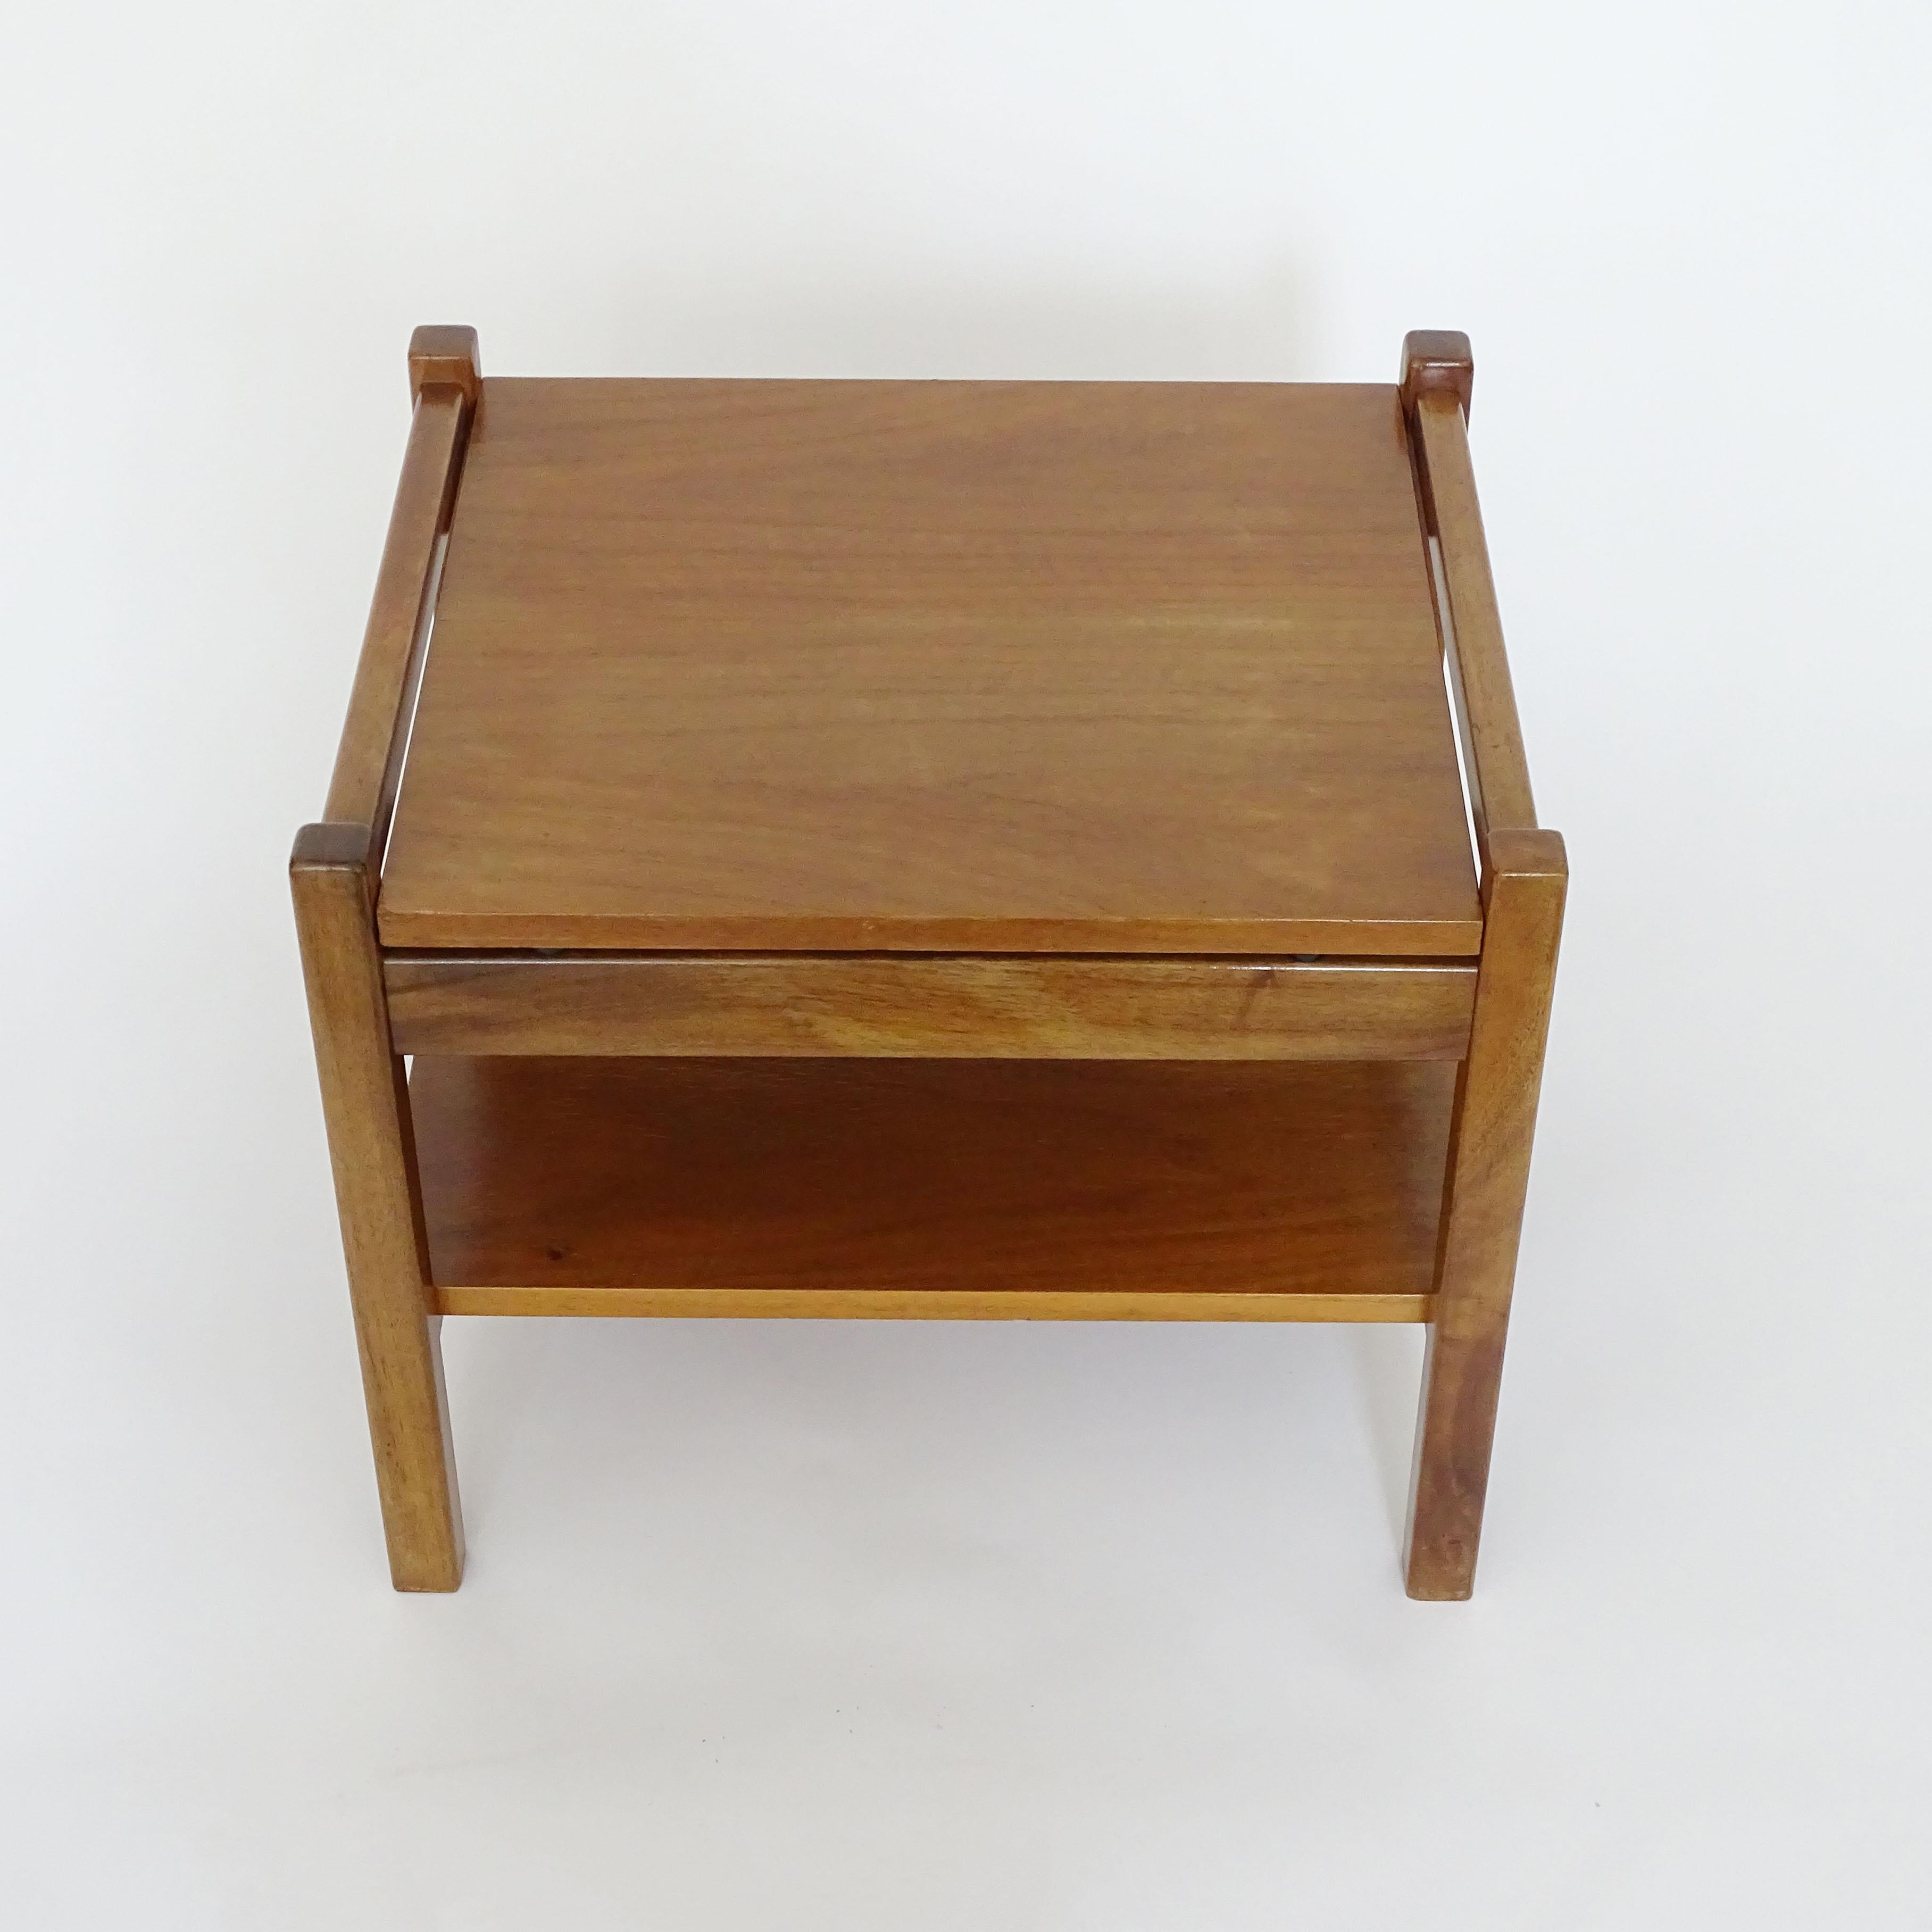 Mid-Century Modern Ettore Sottsass Single Bedside Table for Poltronova, Italy, 1963 For Sale